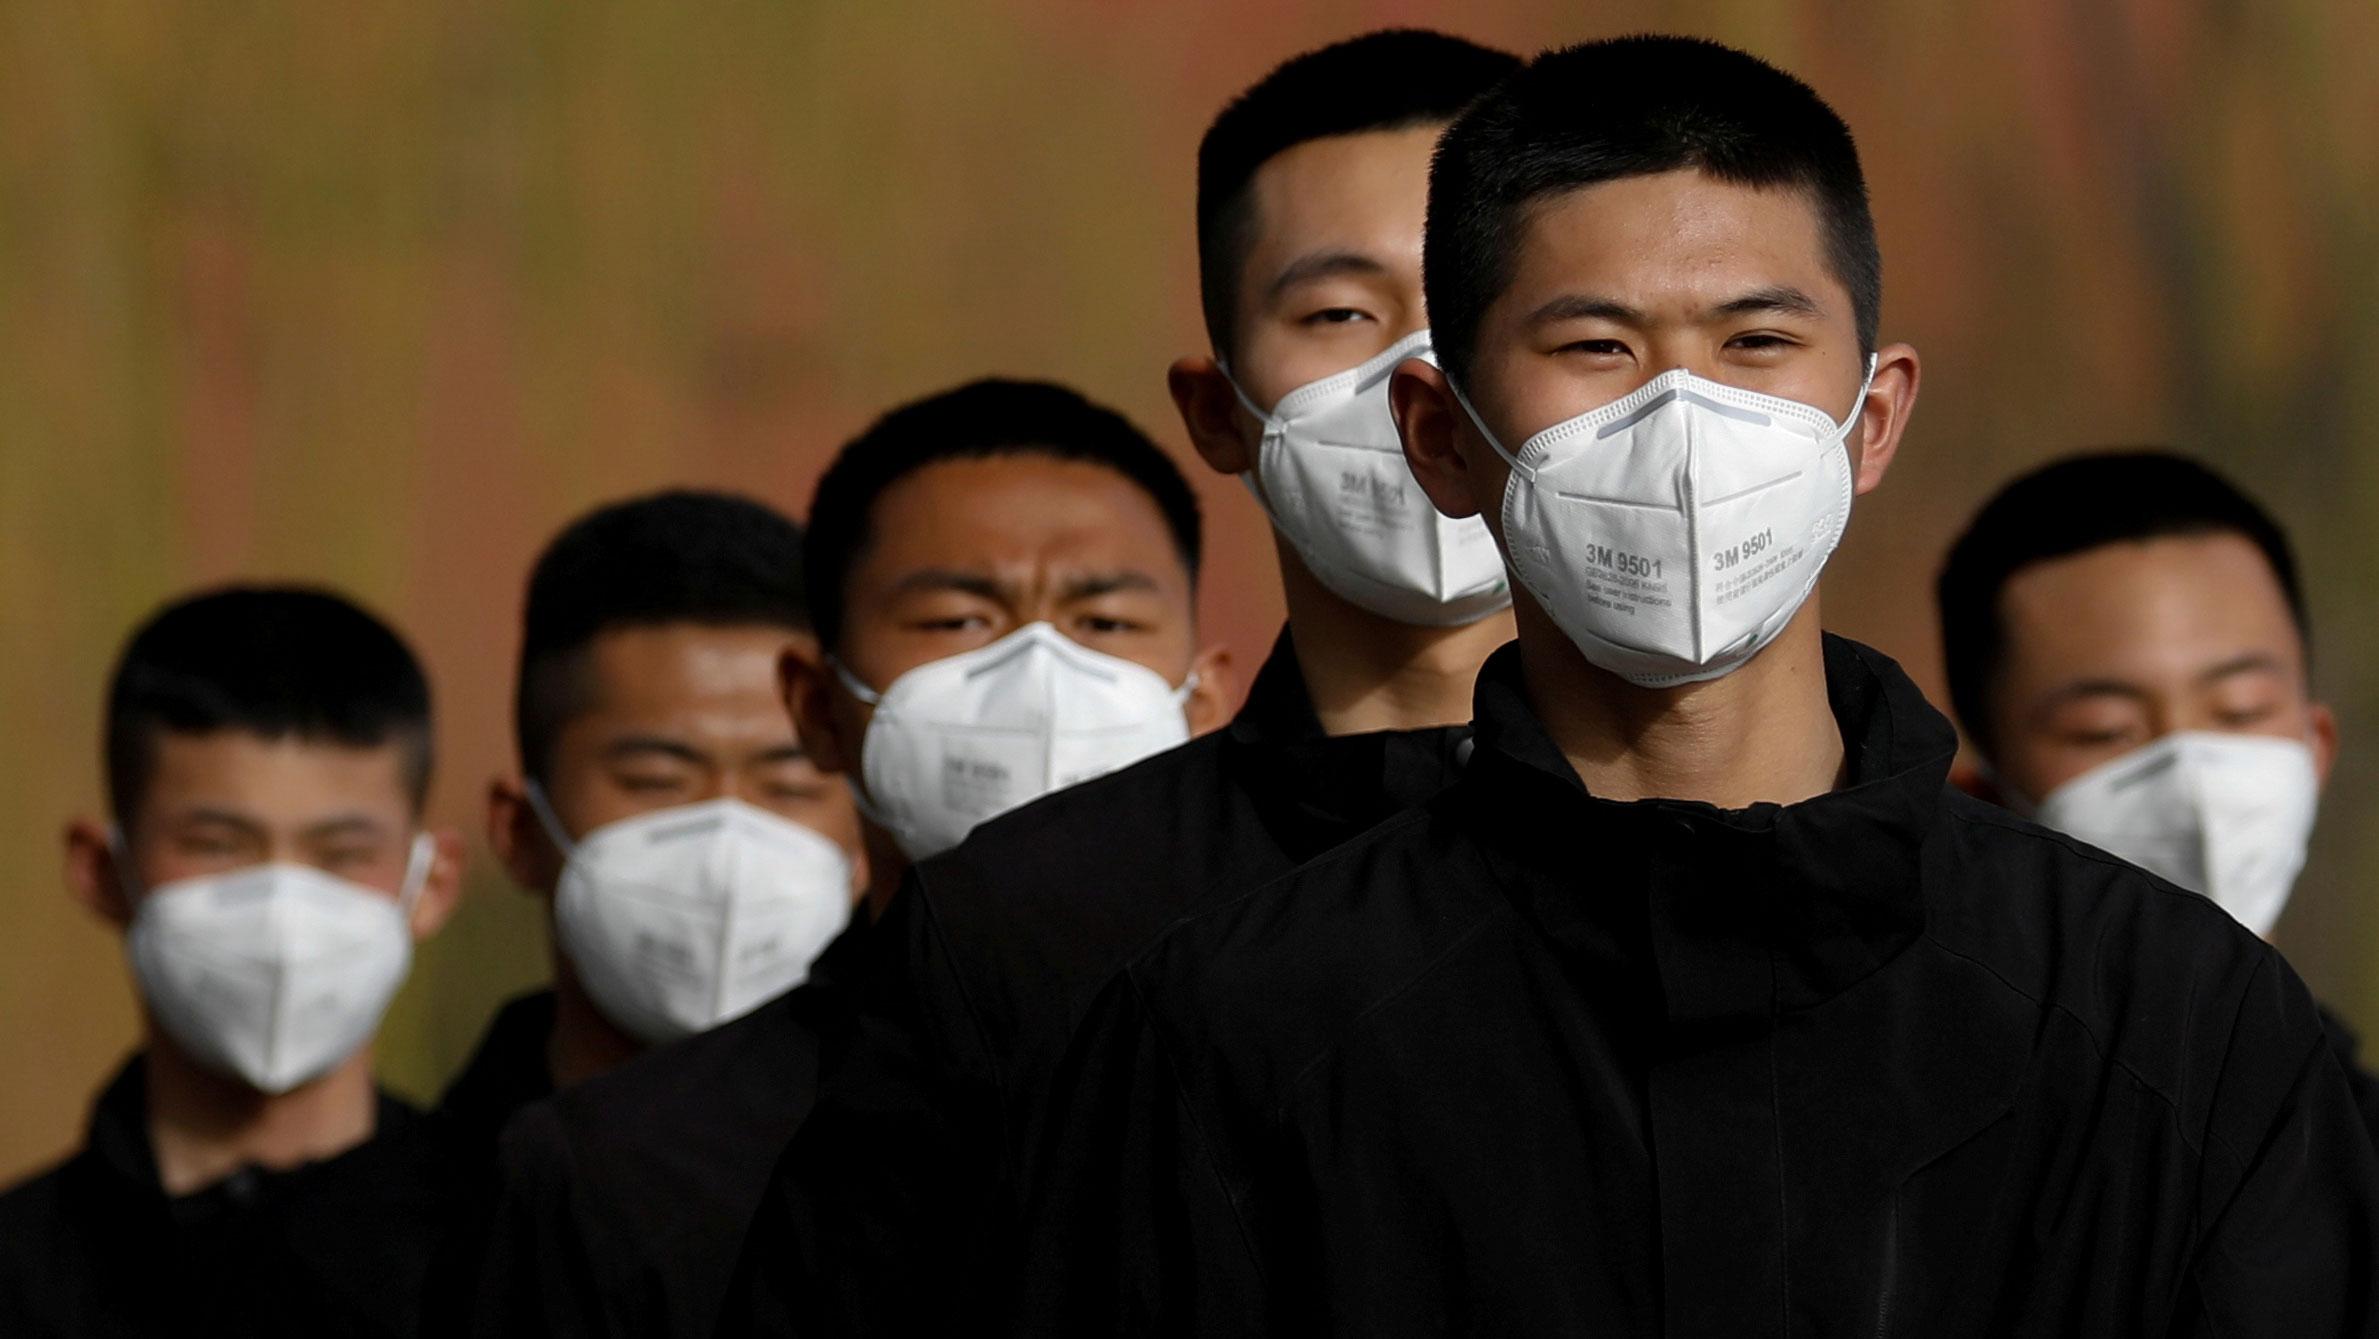 The photo shows half a dozen young men with short cropped hair and all-black clothes in a line, wearing masks. 